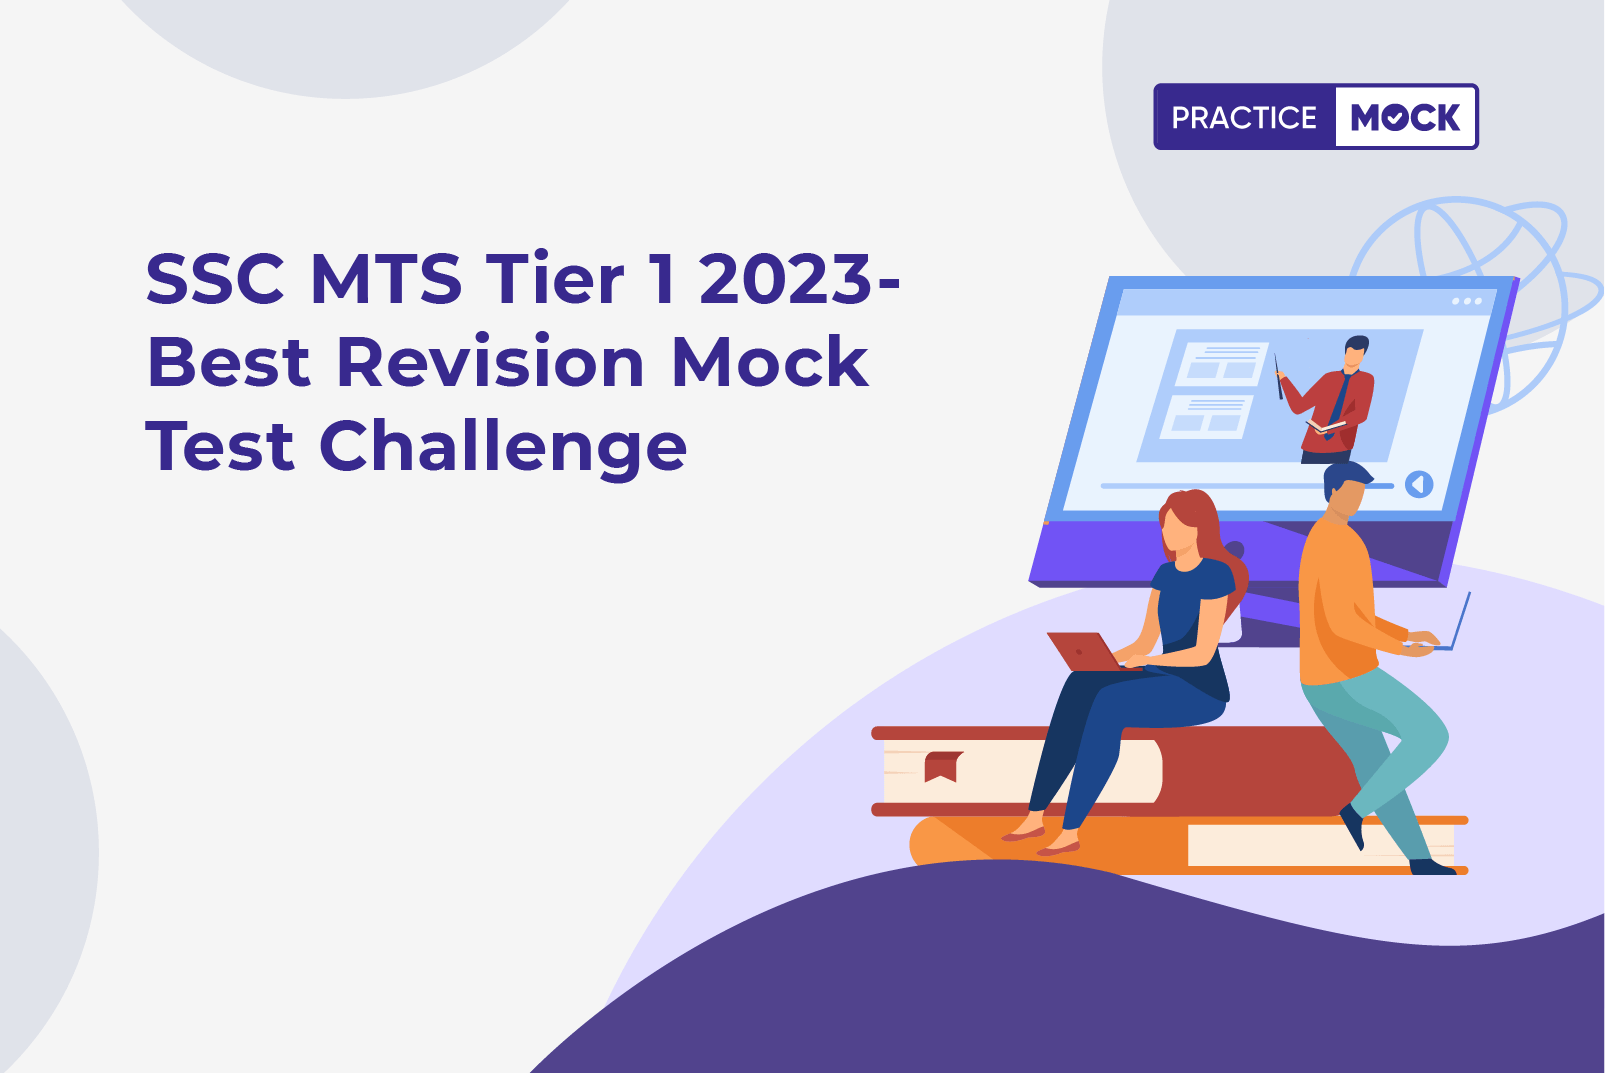 SSC MTS Tier 1 2023-10 Days Revision Plan for (9th May to 19th May 2023)